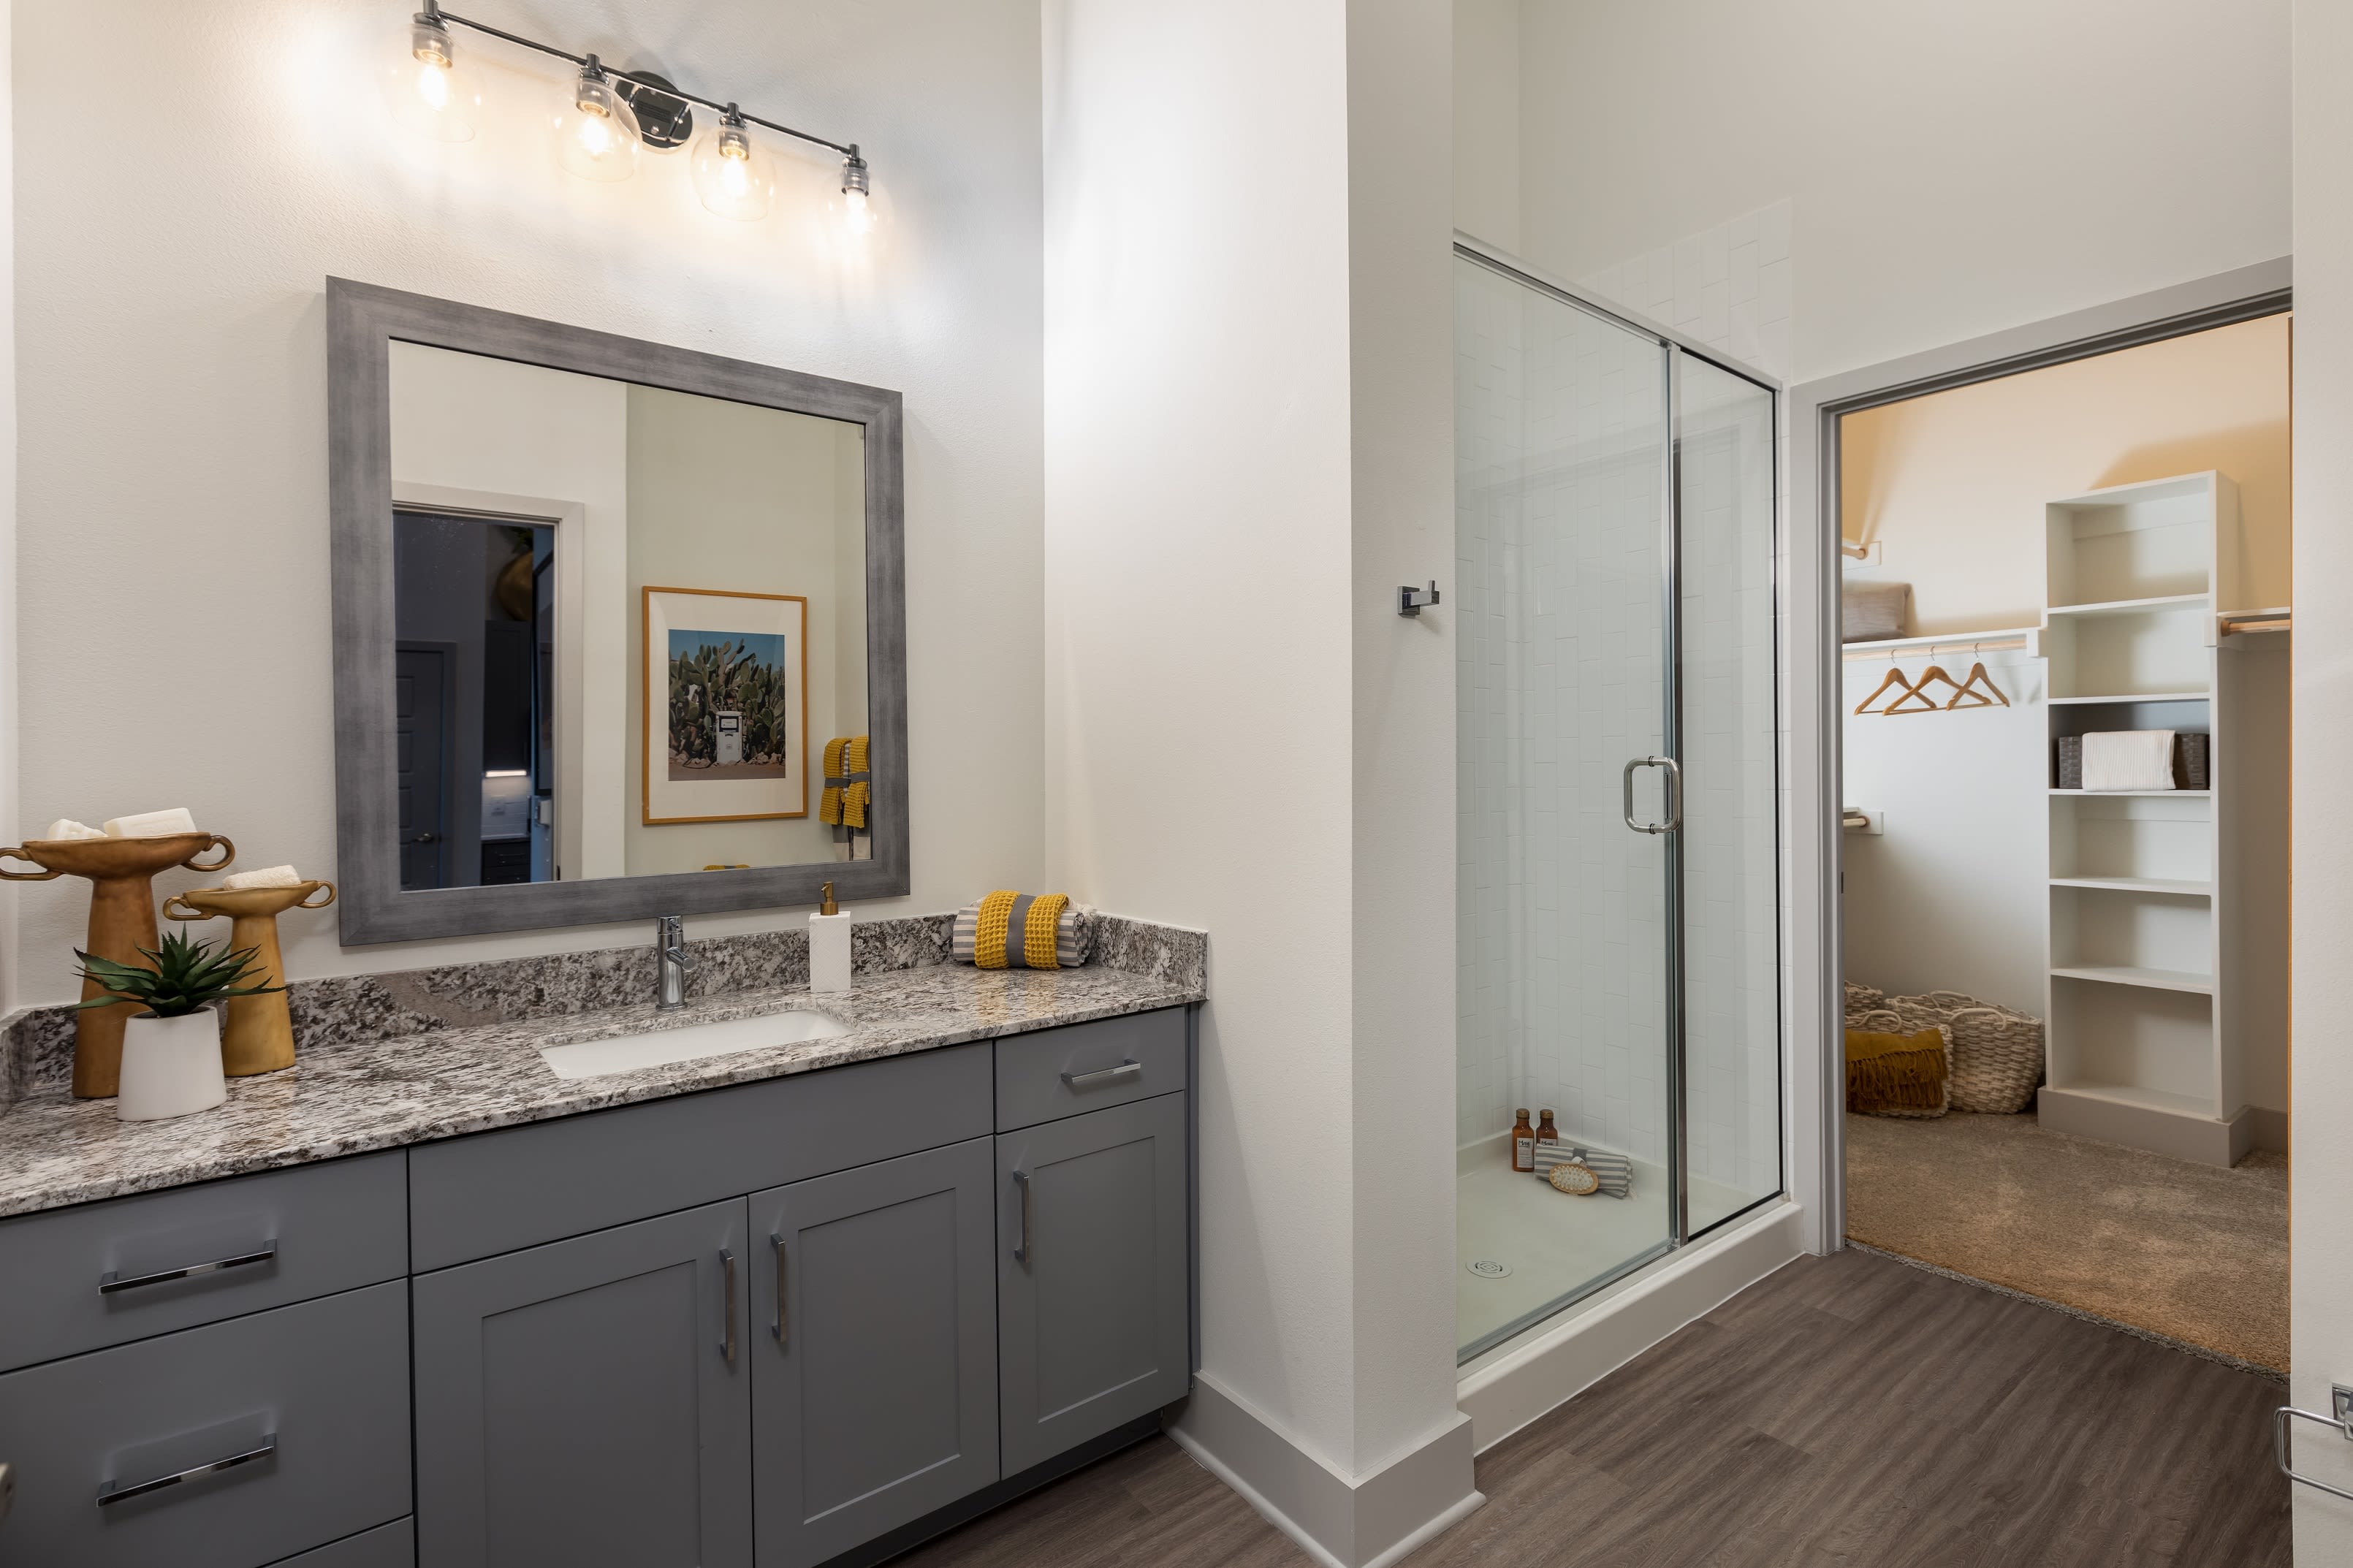 Roomy bathroom with lots of storage space under the large vanity at The ReVe in Garland, Texas